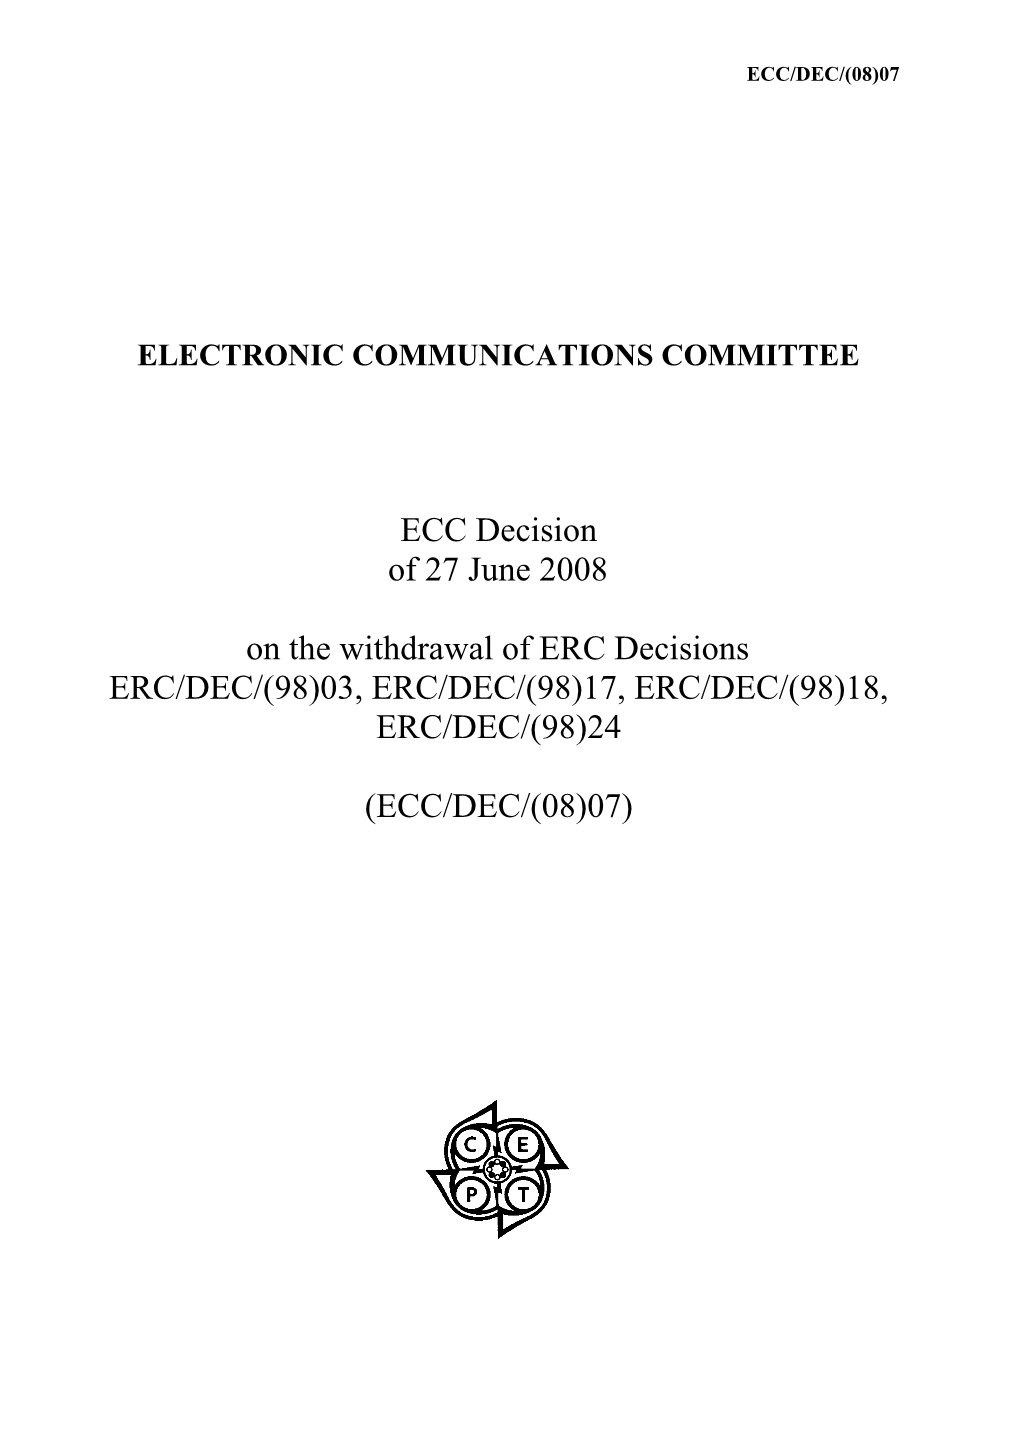 Electronic Communications Committee